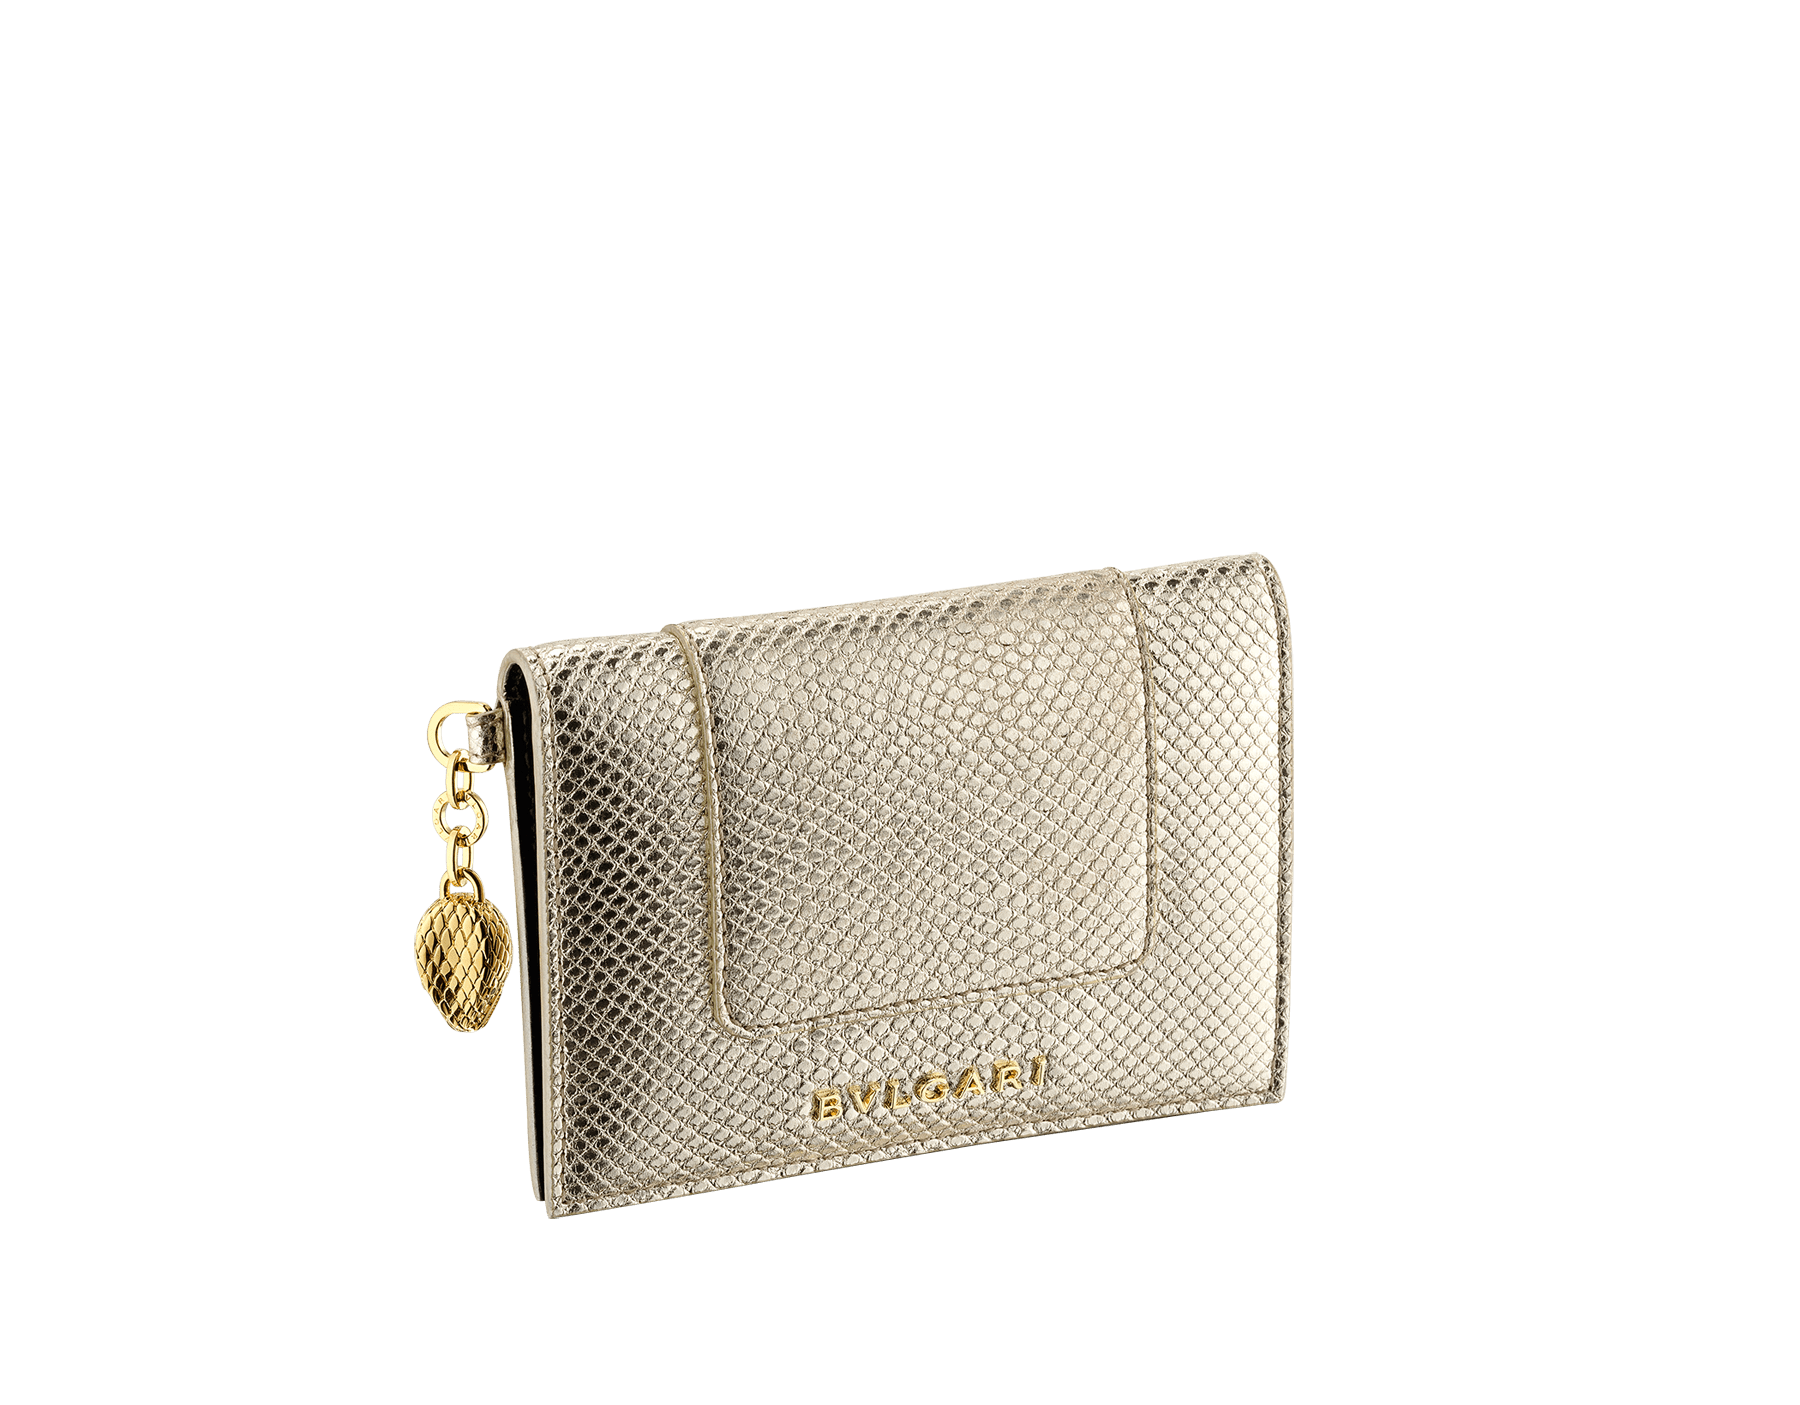 "Serpenti Forever" bi-fold card holder in "Molten" gold karung skin and black calfskin, offering a touch of radiance for the Winter Holidays. New Serpenti head charm in gold-plated brass, complete with ruby-red enamel eyes. SEA-CC-HOLDER-FOLD-MoltK image 1